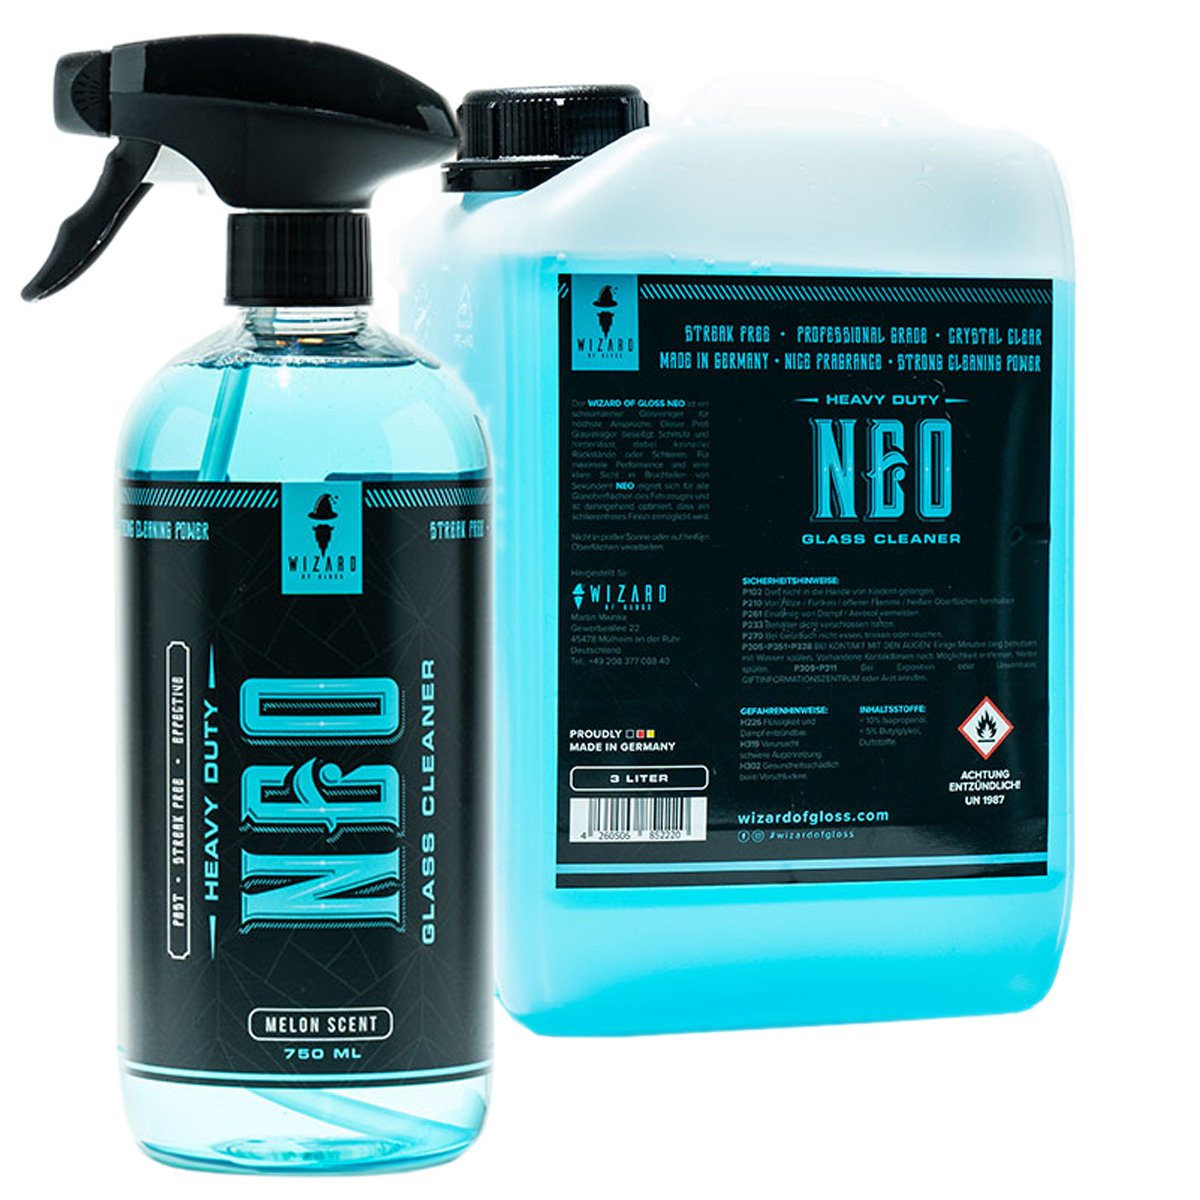 NEO Glass Cleaner